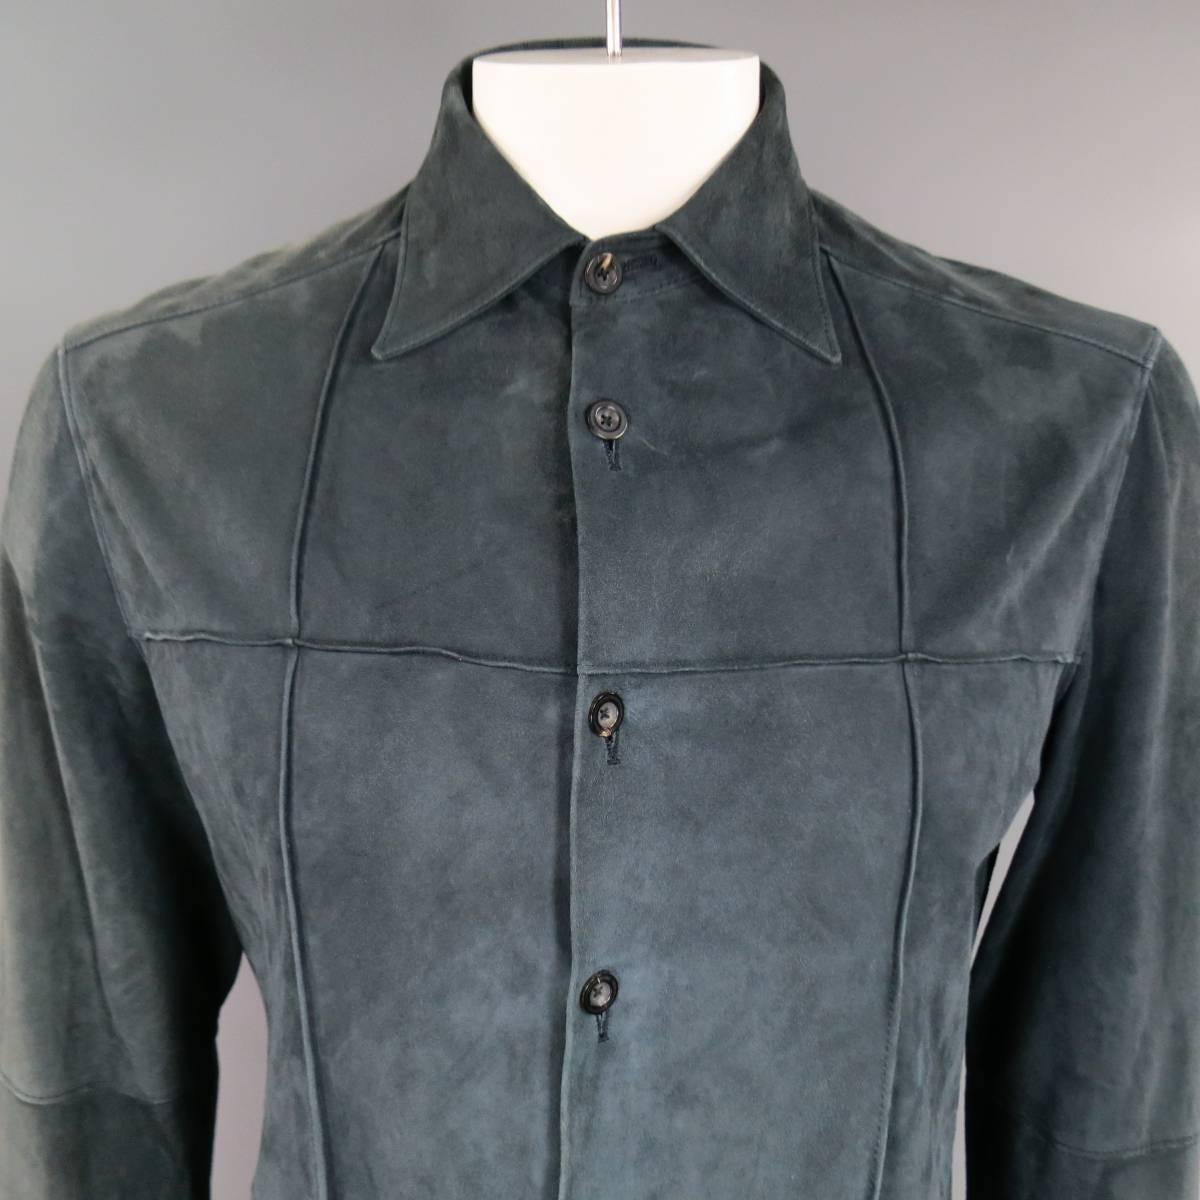 This vintage JIL SANDER shirt comes n a deep navy teal suede with all over grid windowpane seams with a pointed collar and button up  front. Natural wear throughout suede and discolorations on left side shown in detail shots. (AS-IS) Made in